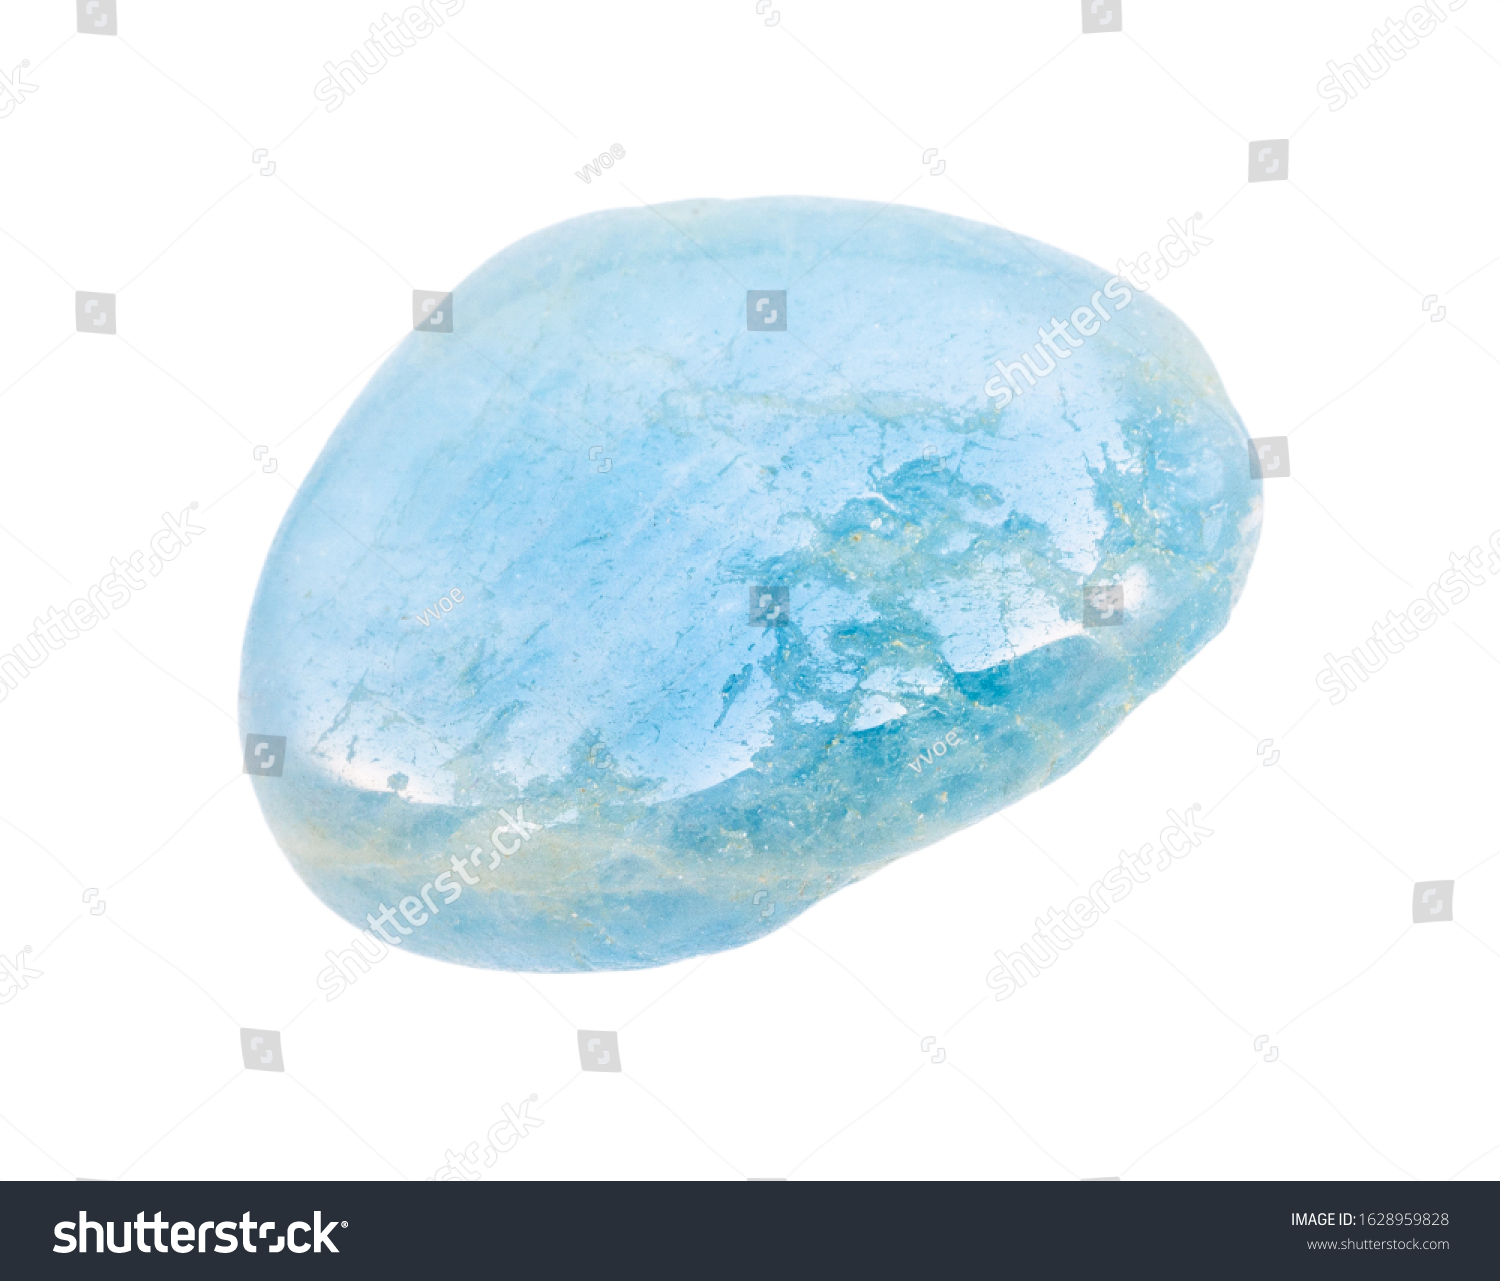 closeup of sample of natural mineral from geological collection - polished Aquamarine (blue Beryl) gemstone isolated on white background #1628959828